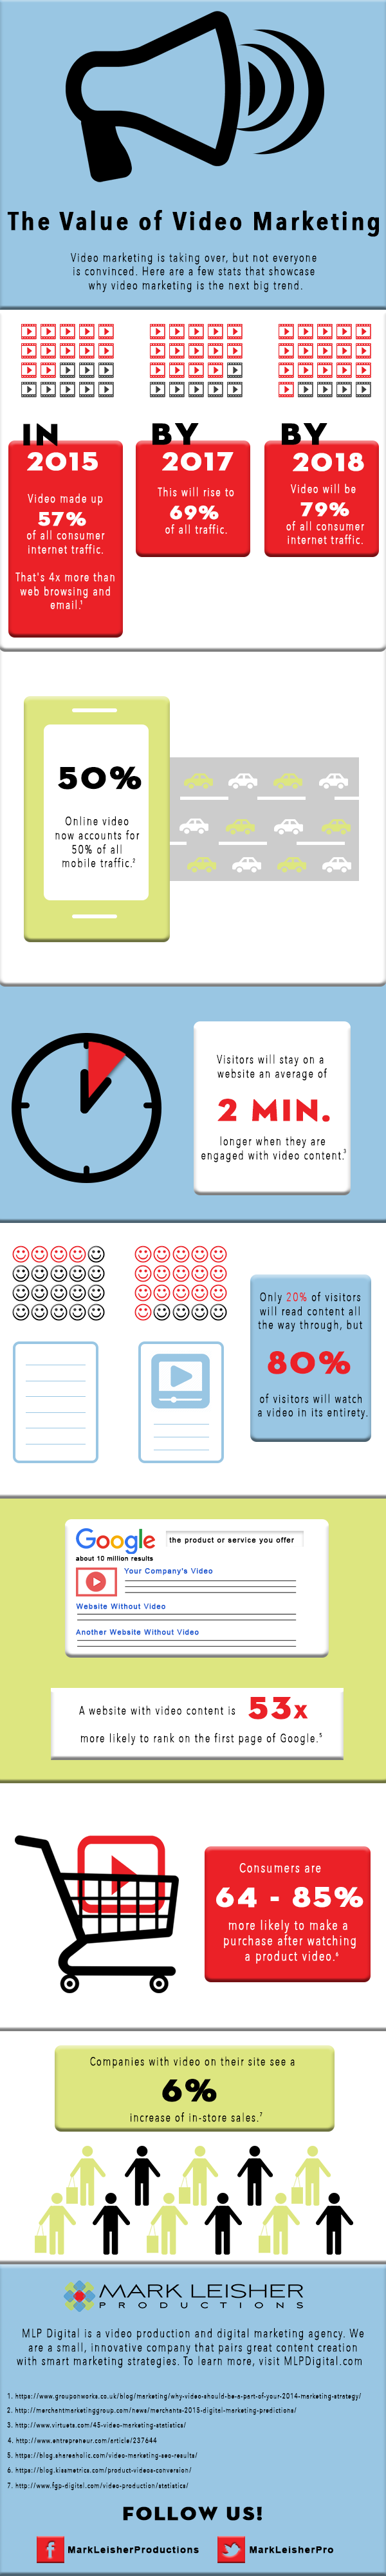 The Value of Video Marketing